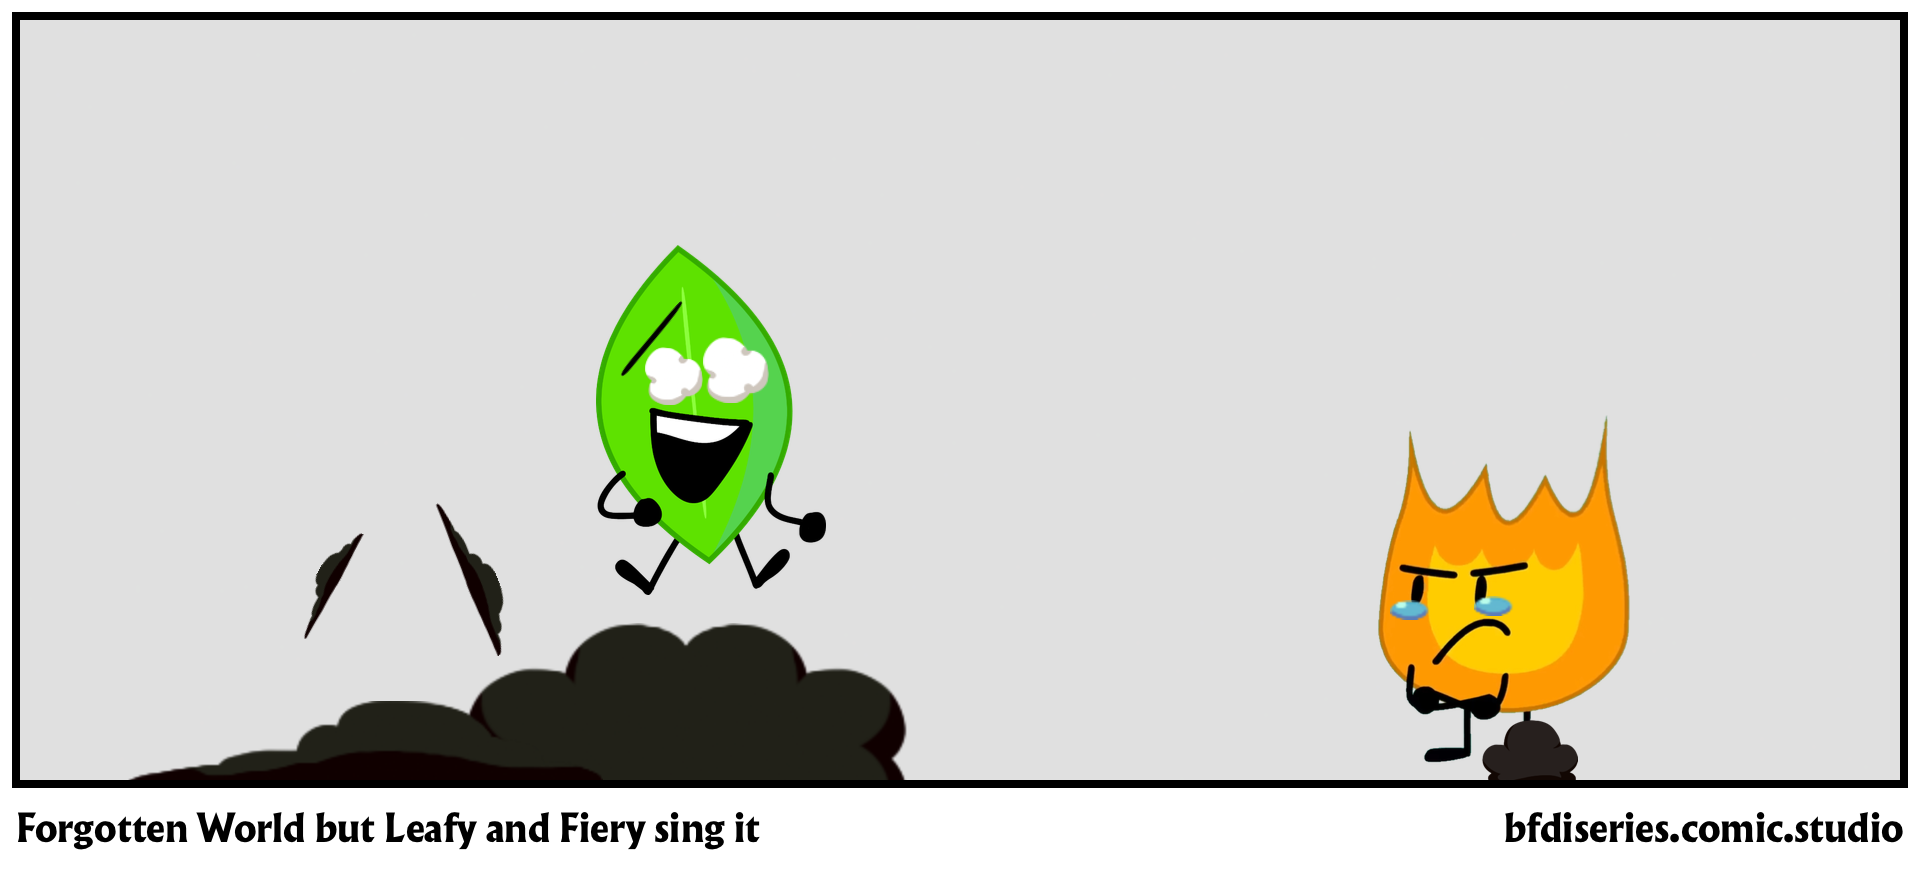 Forgotten World but Leafy and Fiery sing it